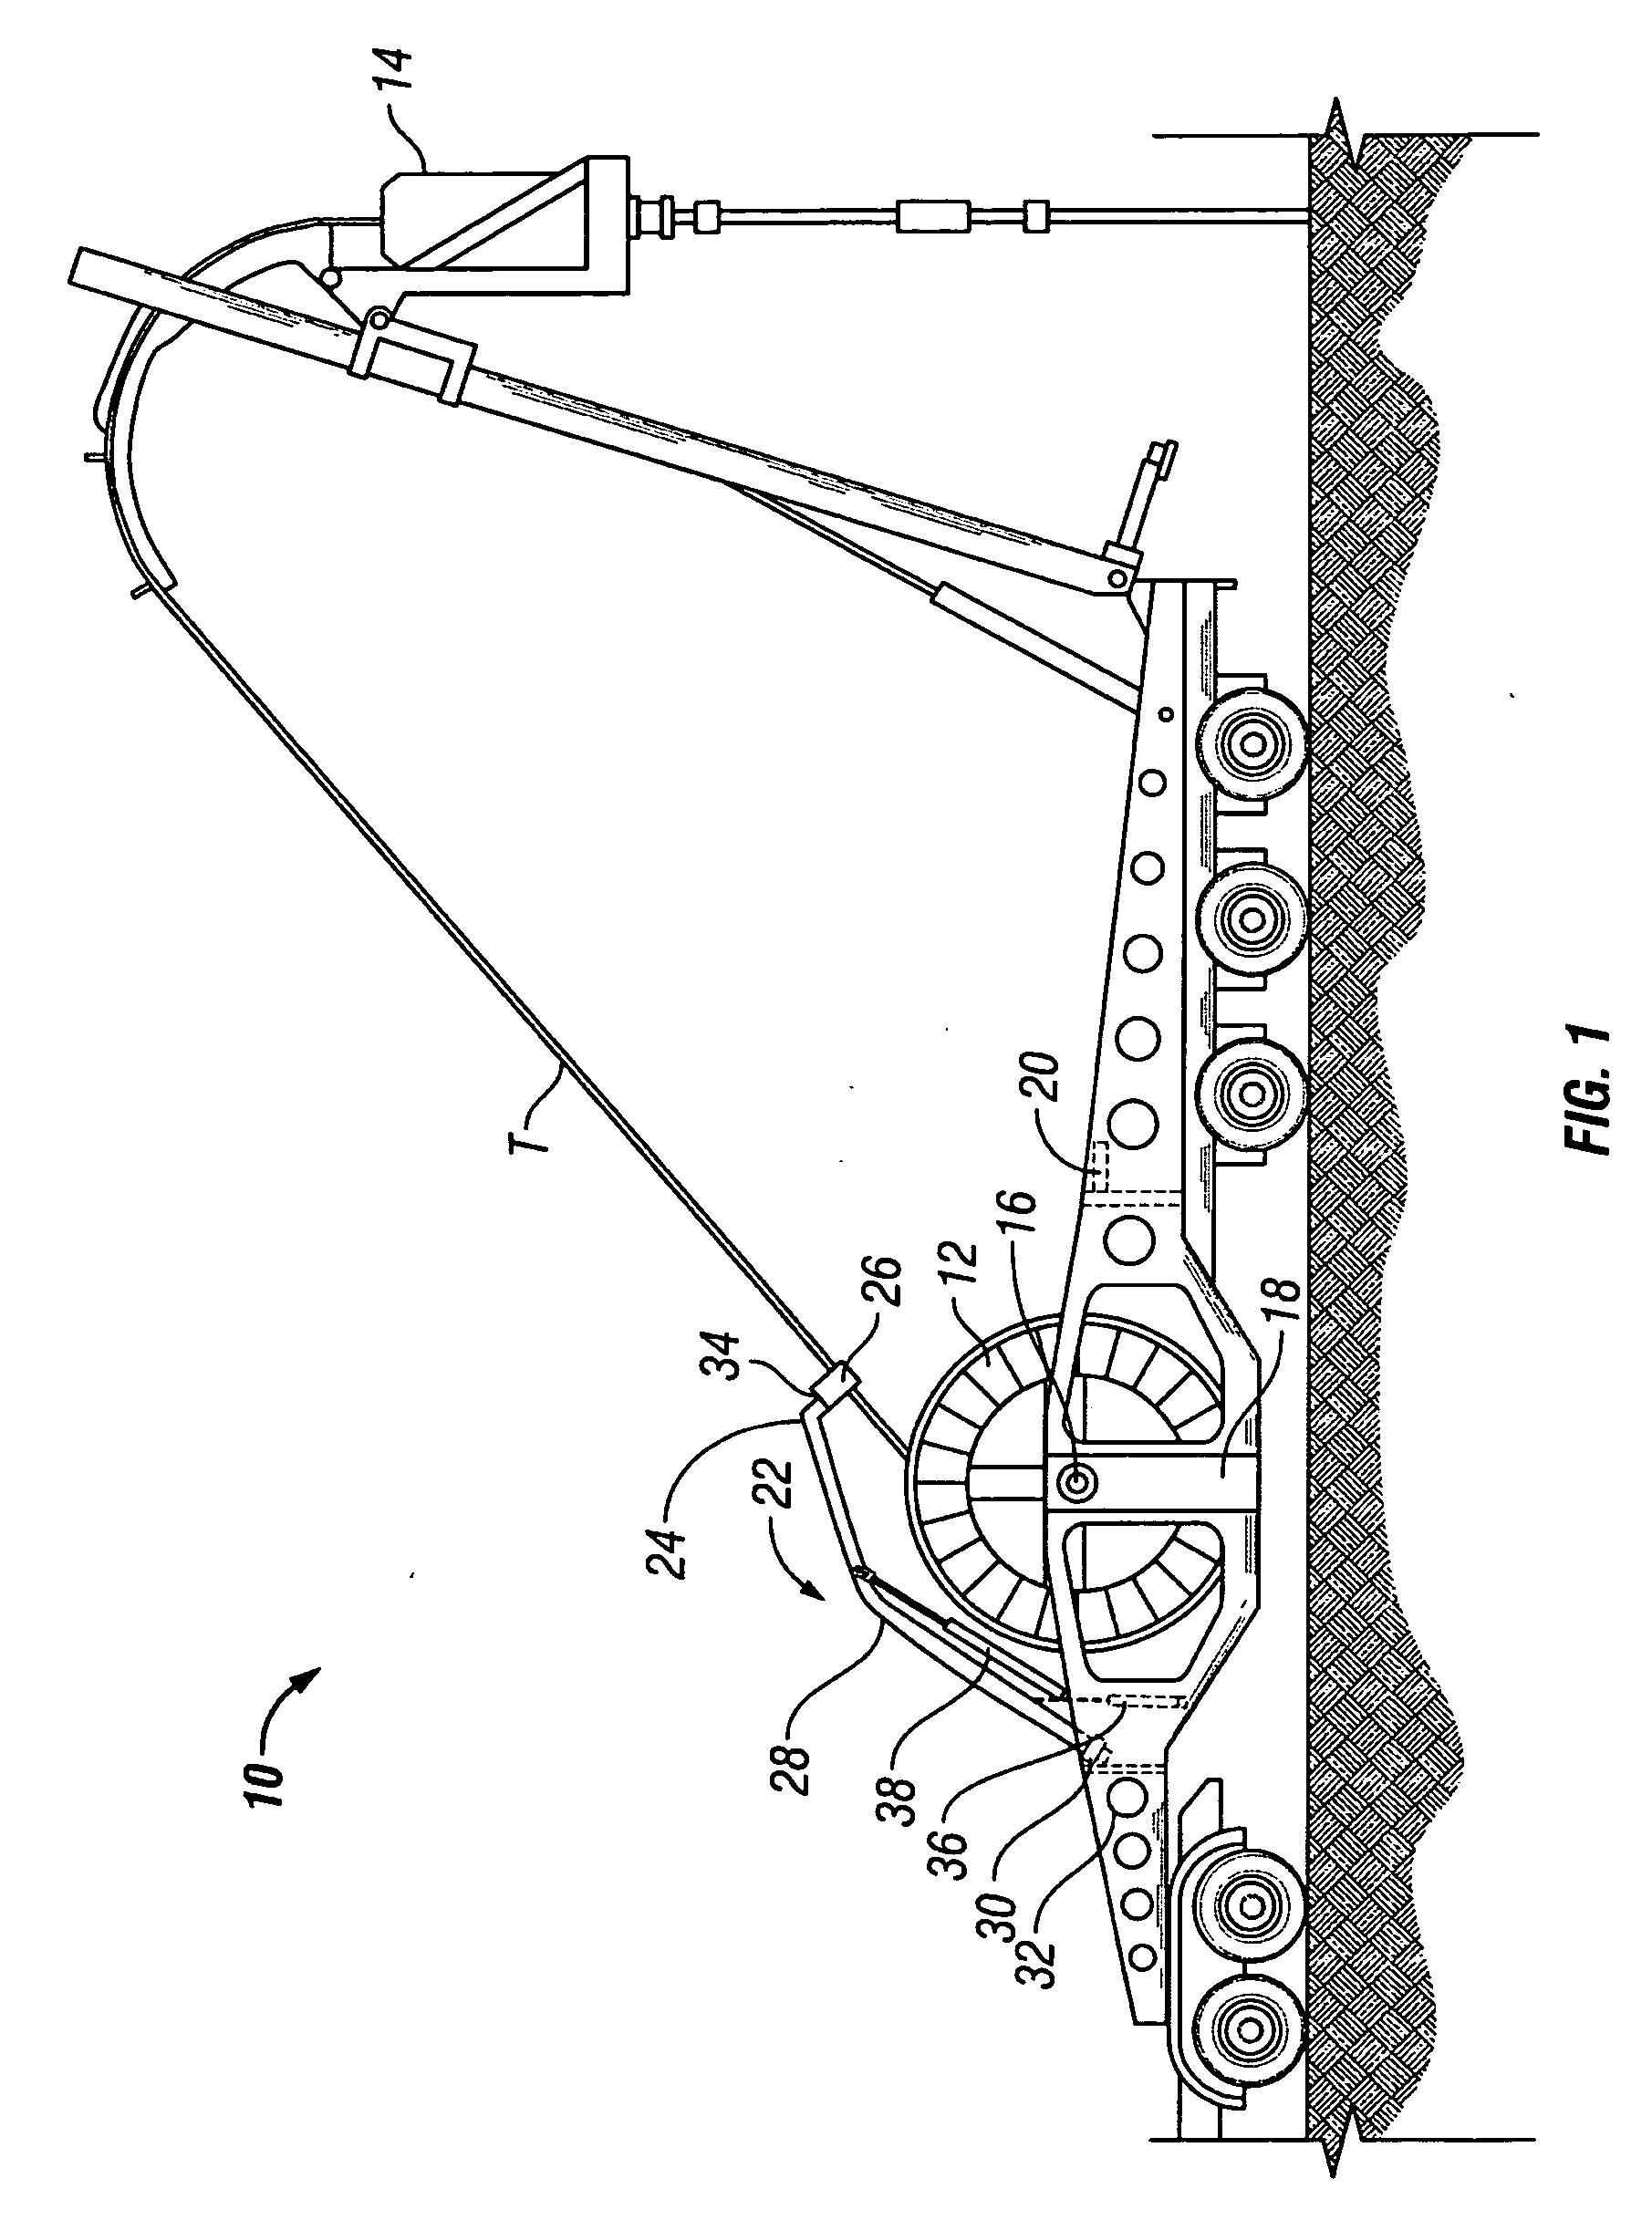 Level-wind system for coiled tubing